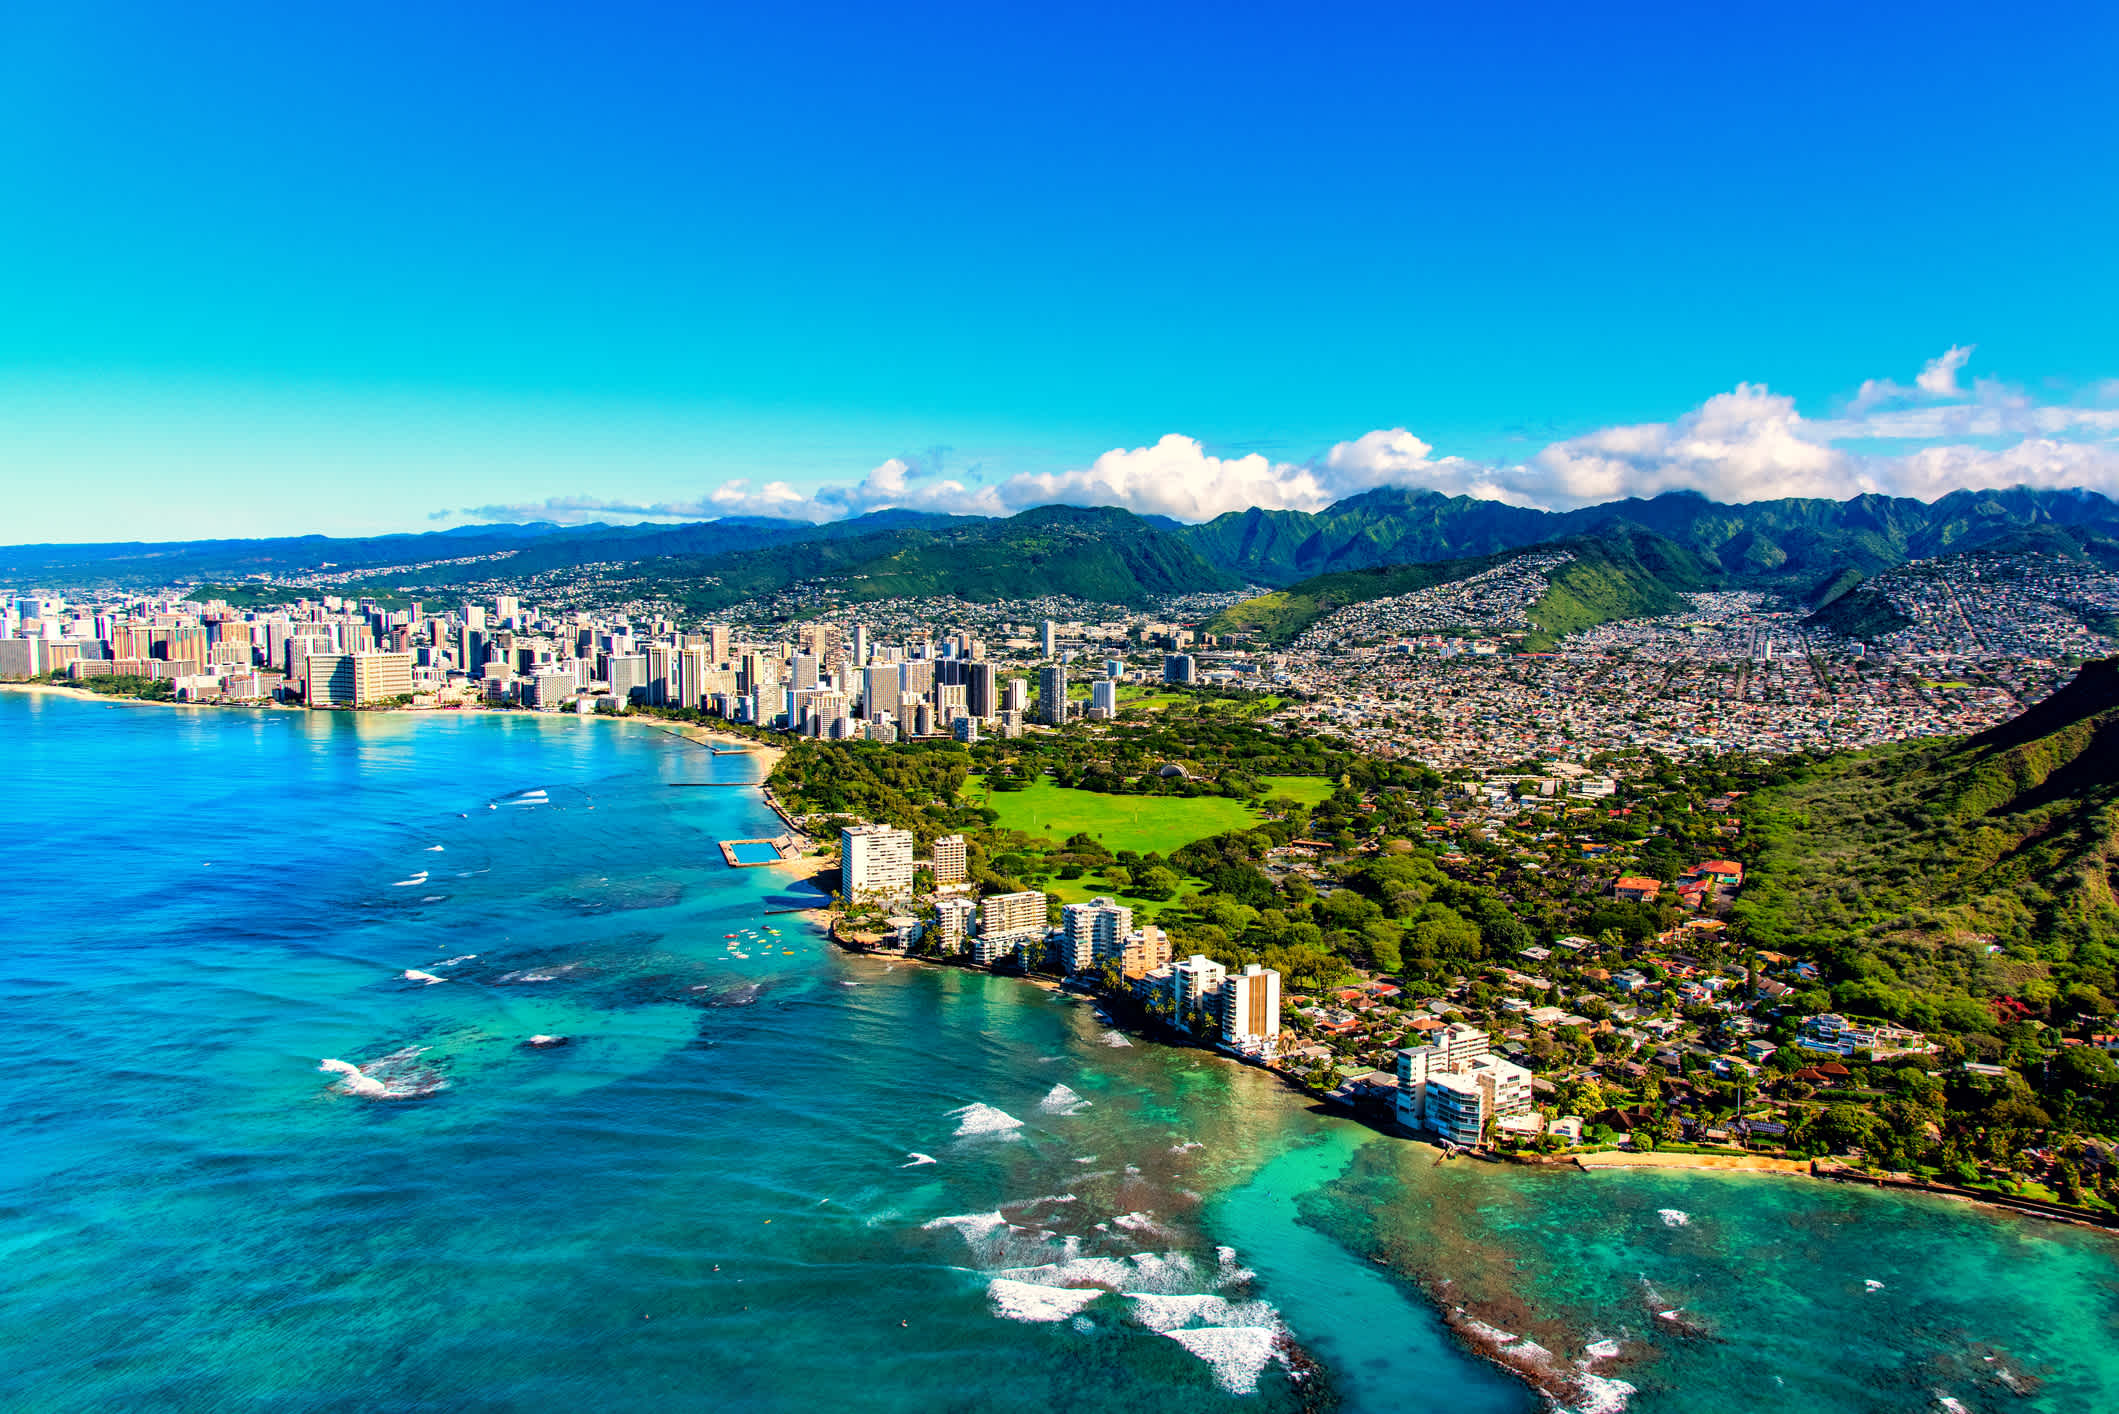 Experience the city's coastline on your Honolulu vacation